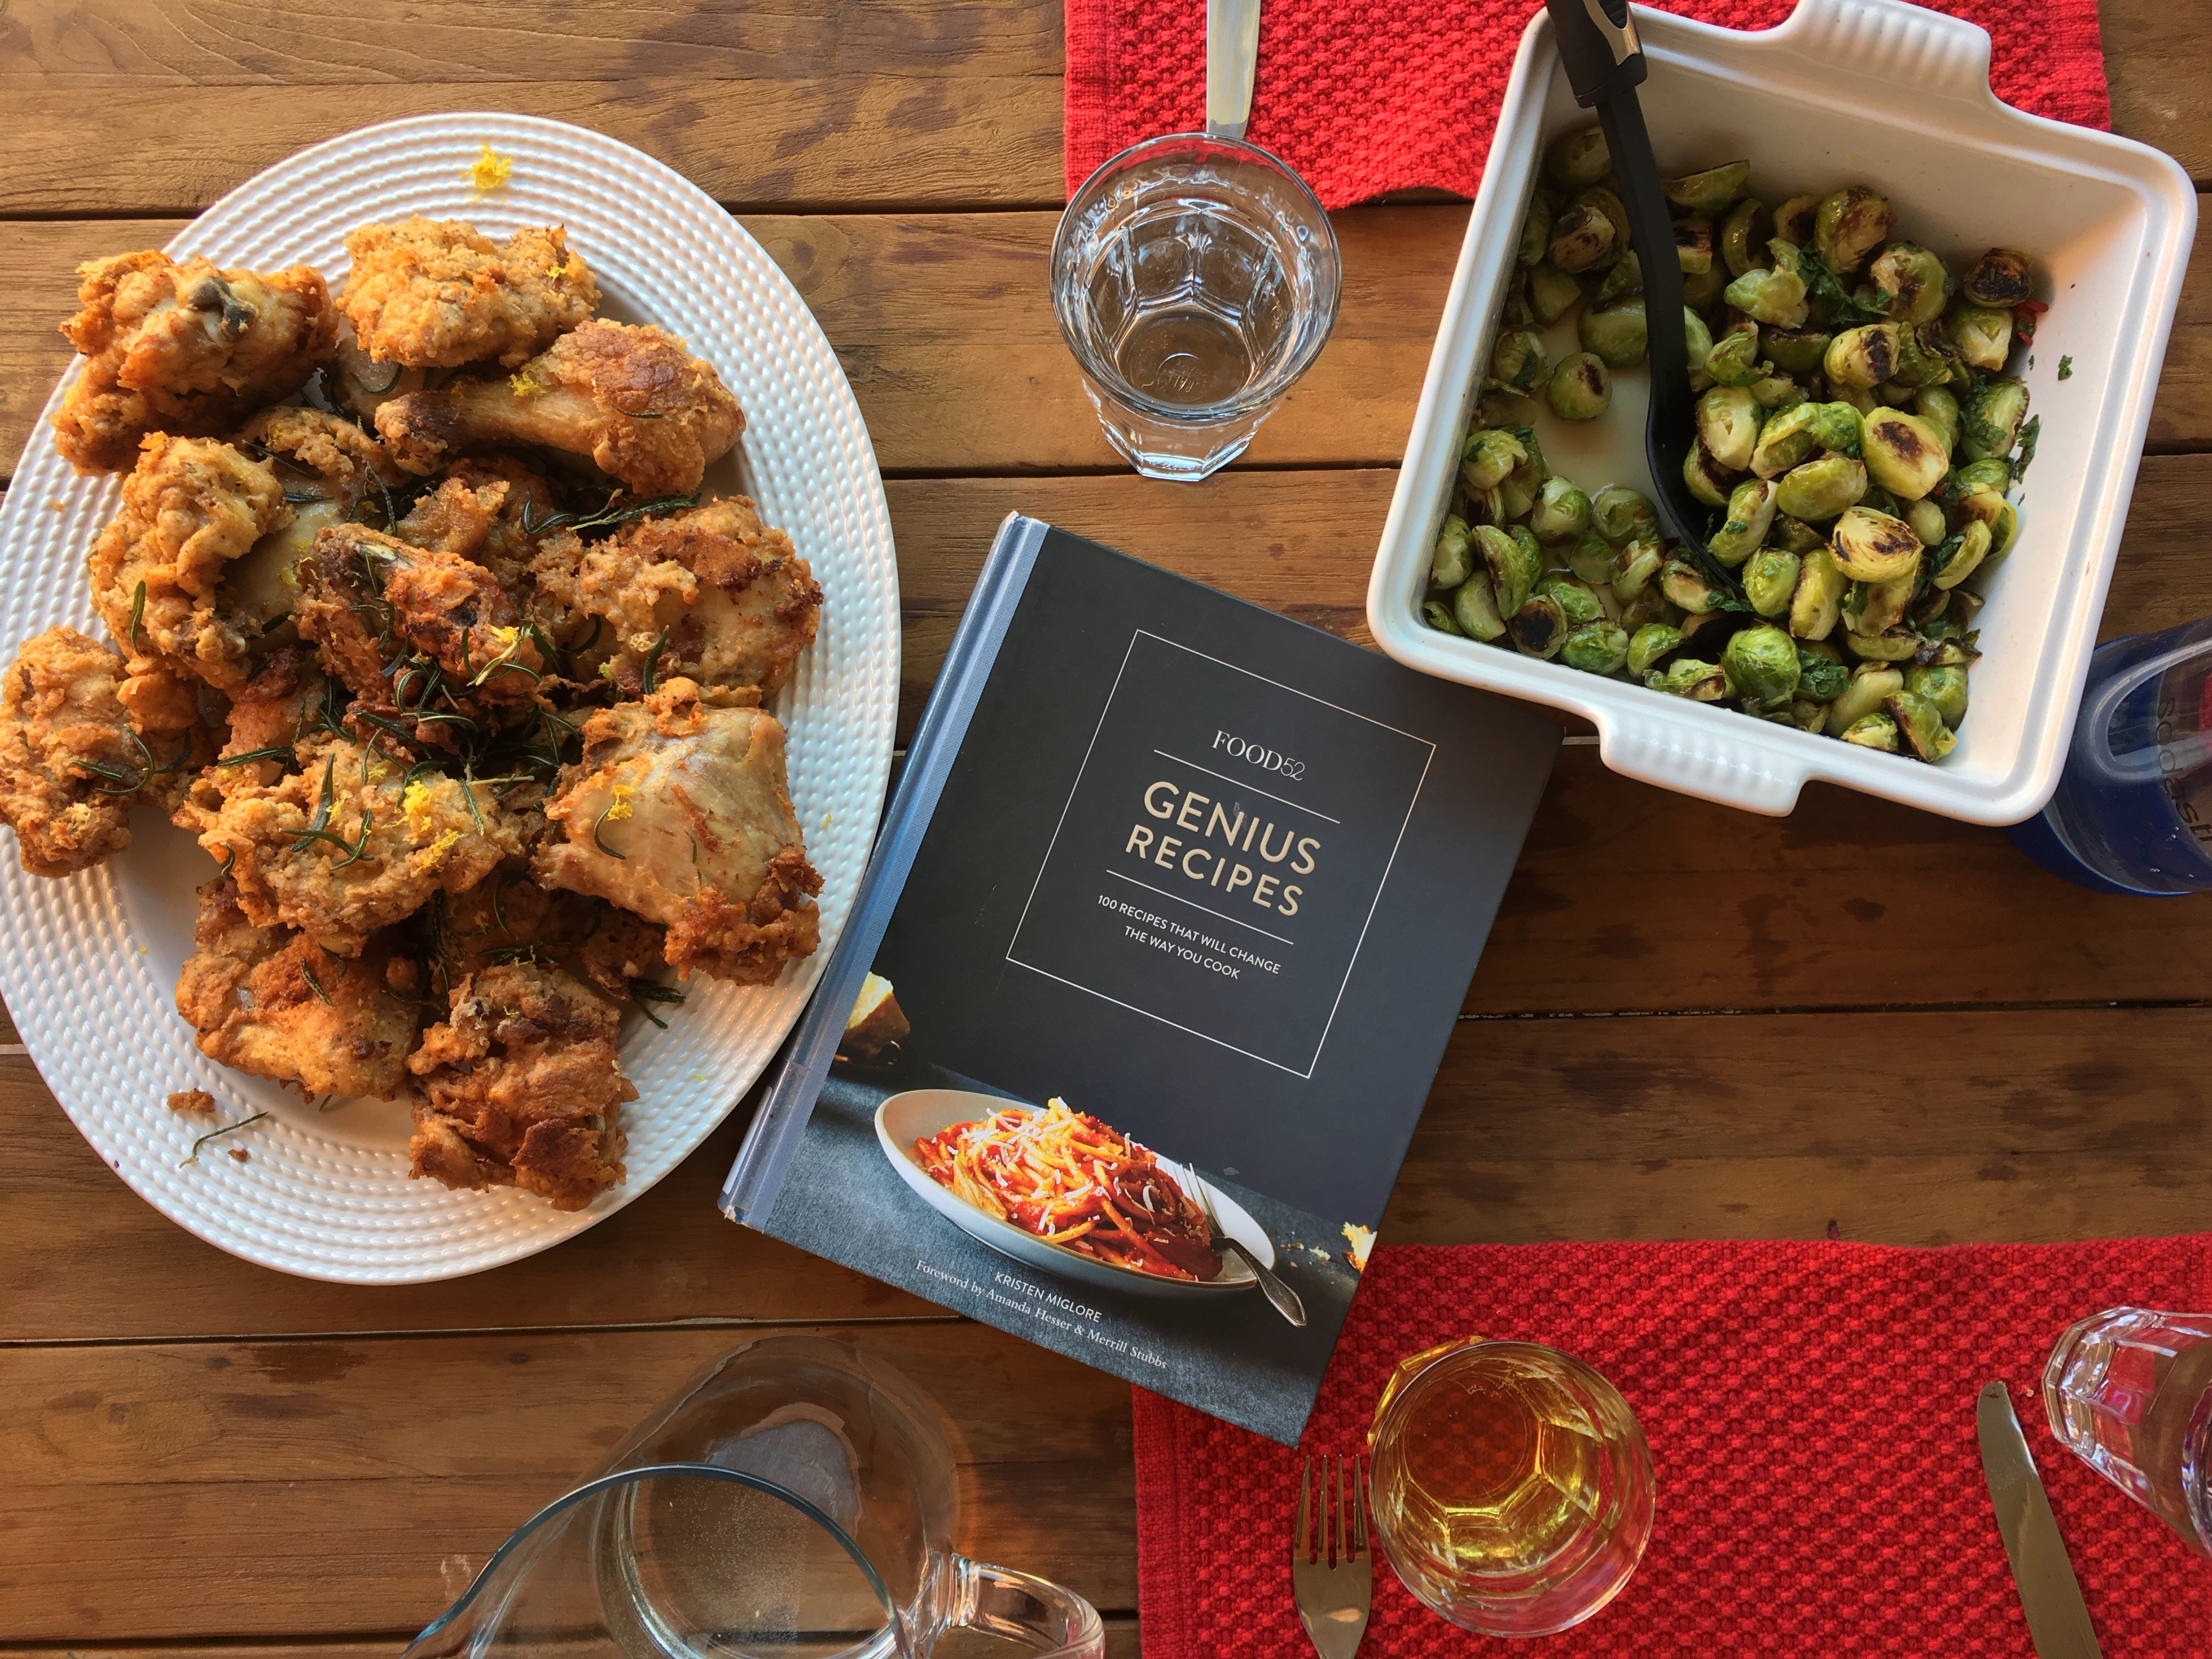 Genius Recipes Cookbook on Dinner table with food